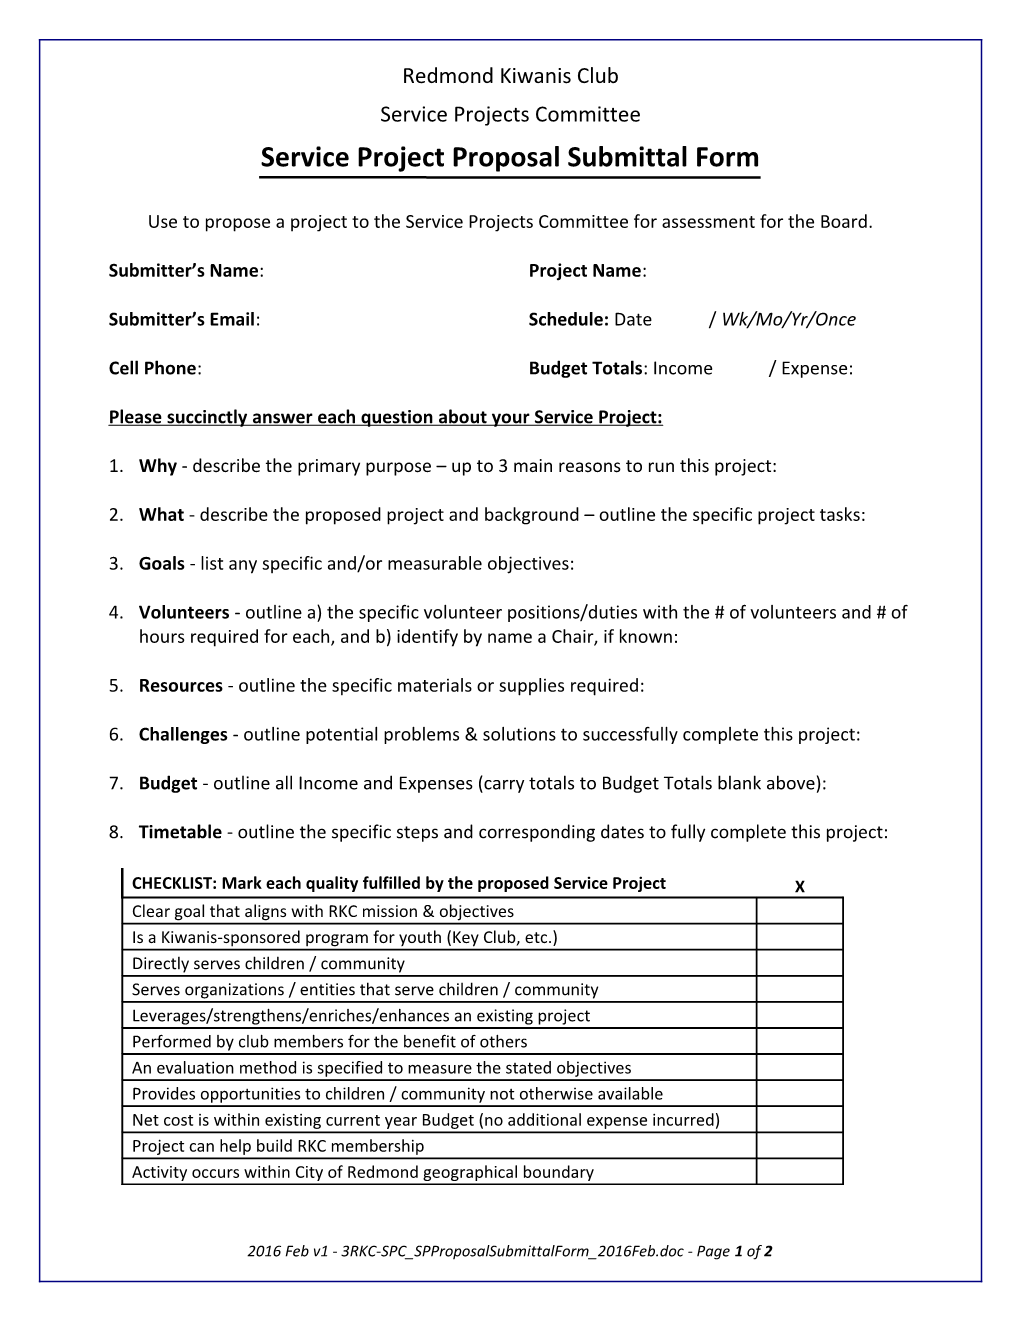 Service Project Proposal Form